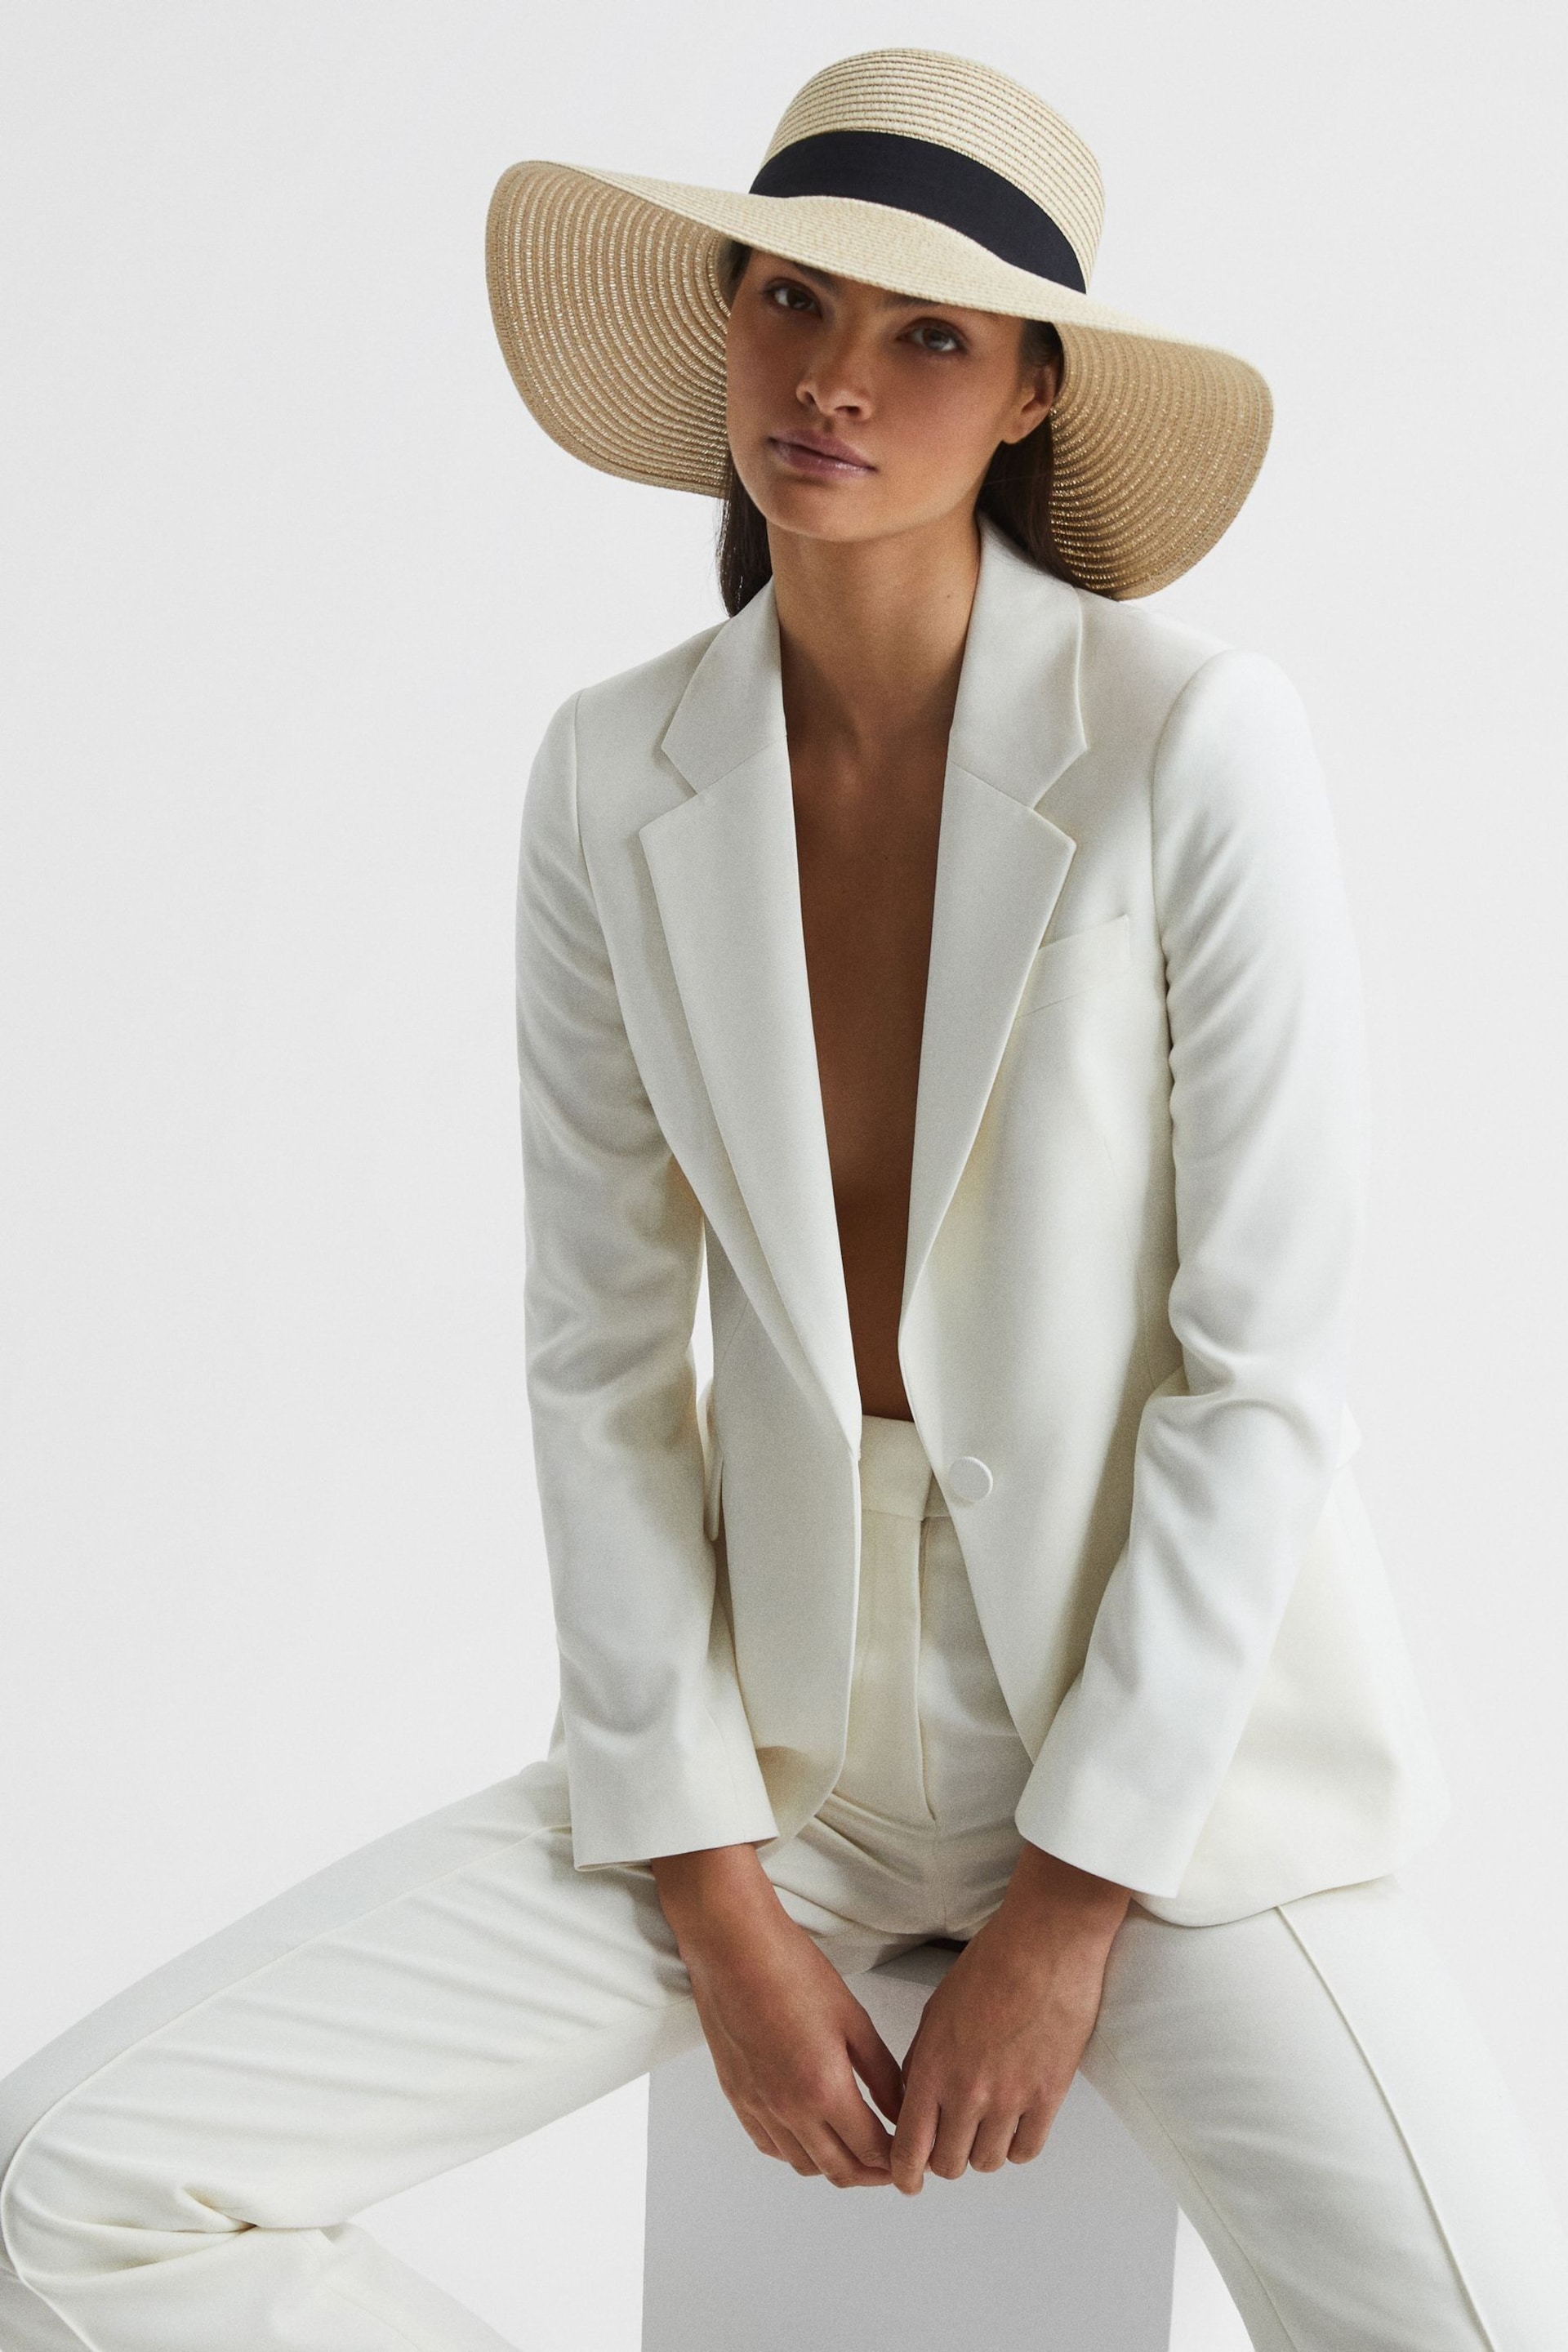 Reiss Natural Lexi Woven Wide Brim Hat - Image 3 of 5